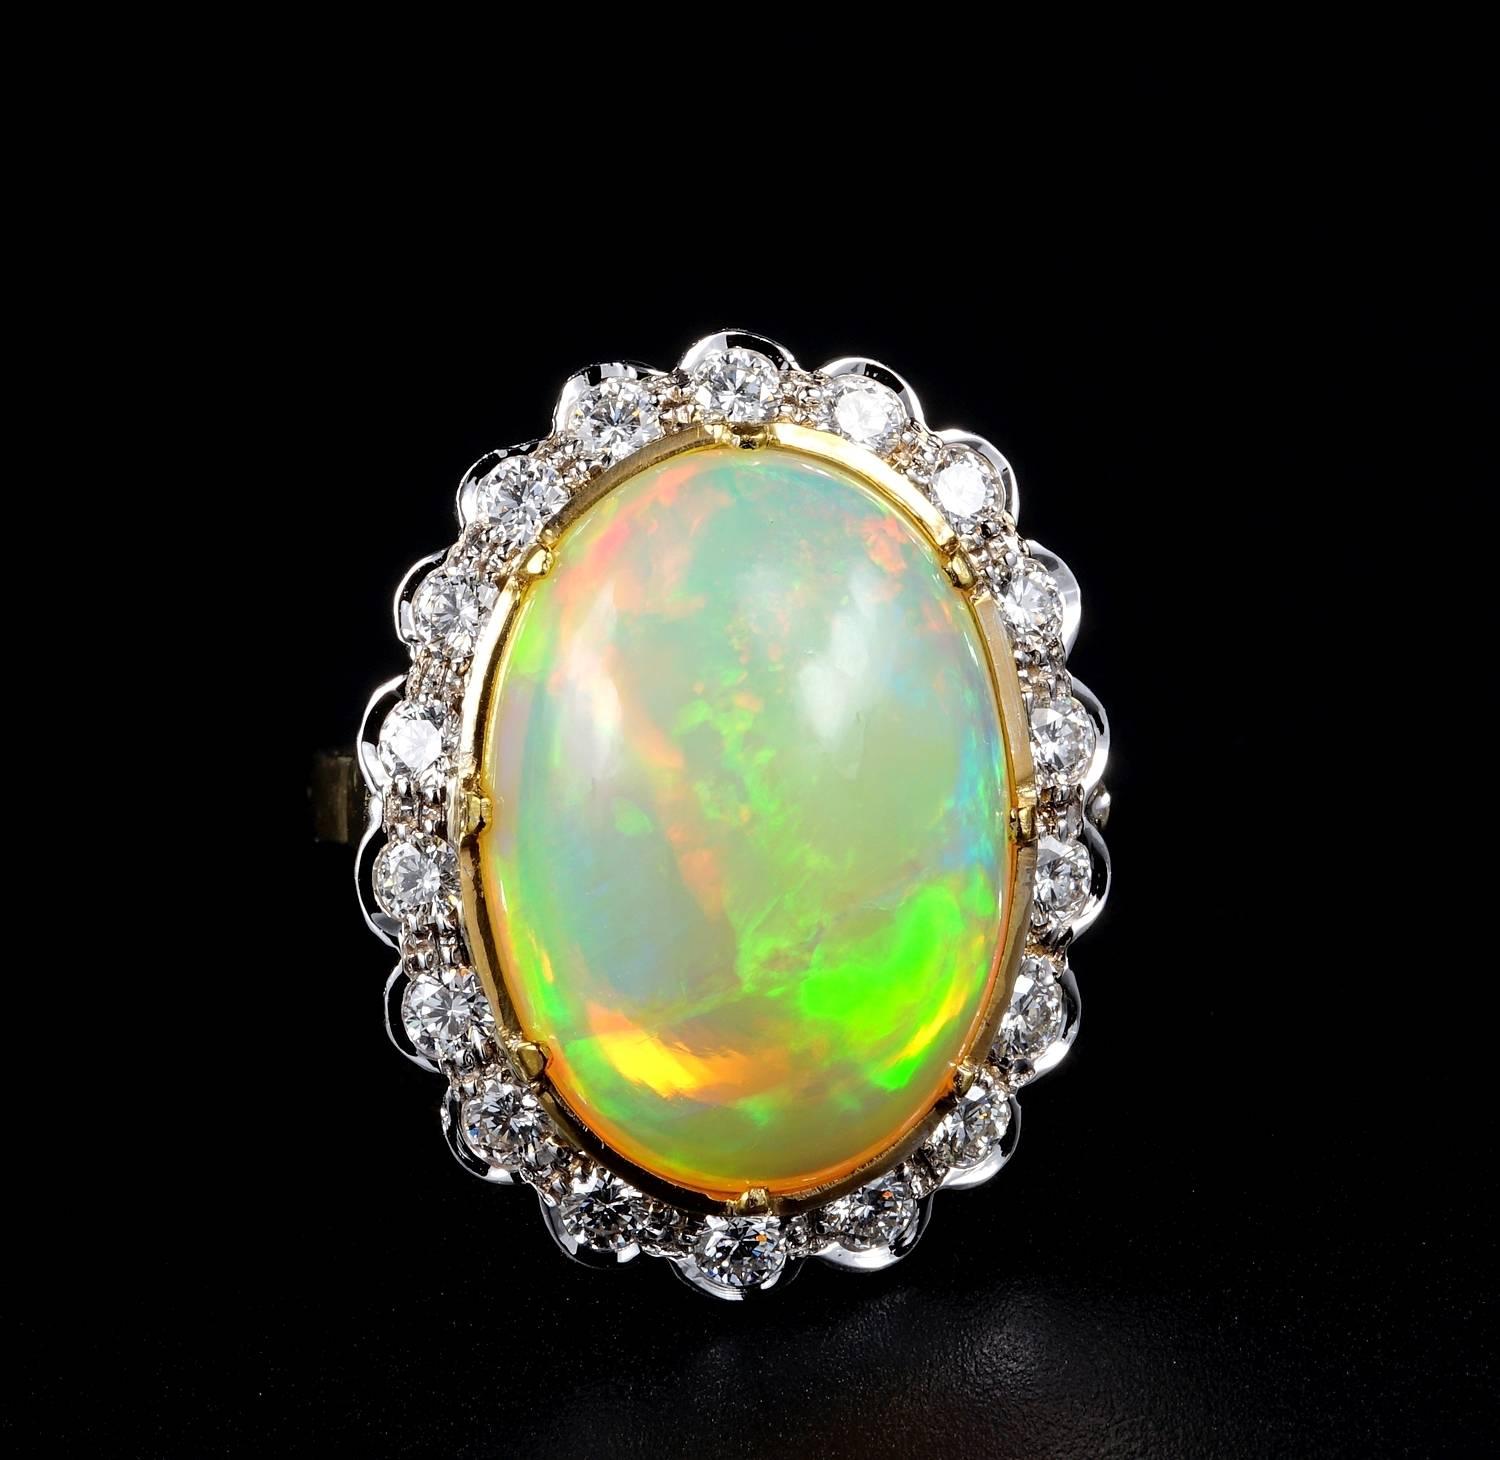 Classy design, sought after in elegance, here is a timeless style of vintage cluster ring
Superbly hand crafted as individual piece of solid 18 KT gold - marked
Italian origin, 1960 ca
Outstanding in scale, boasting a 10.0 Carat natural Opal full of